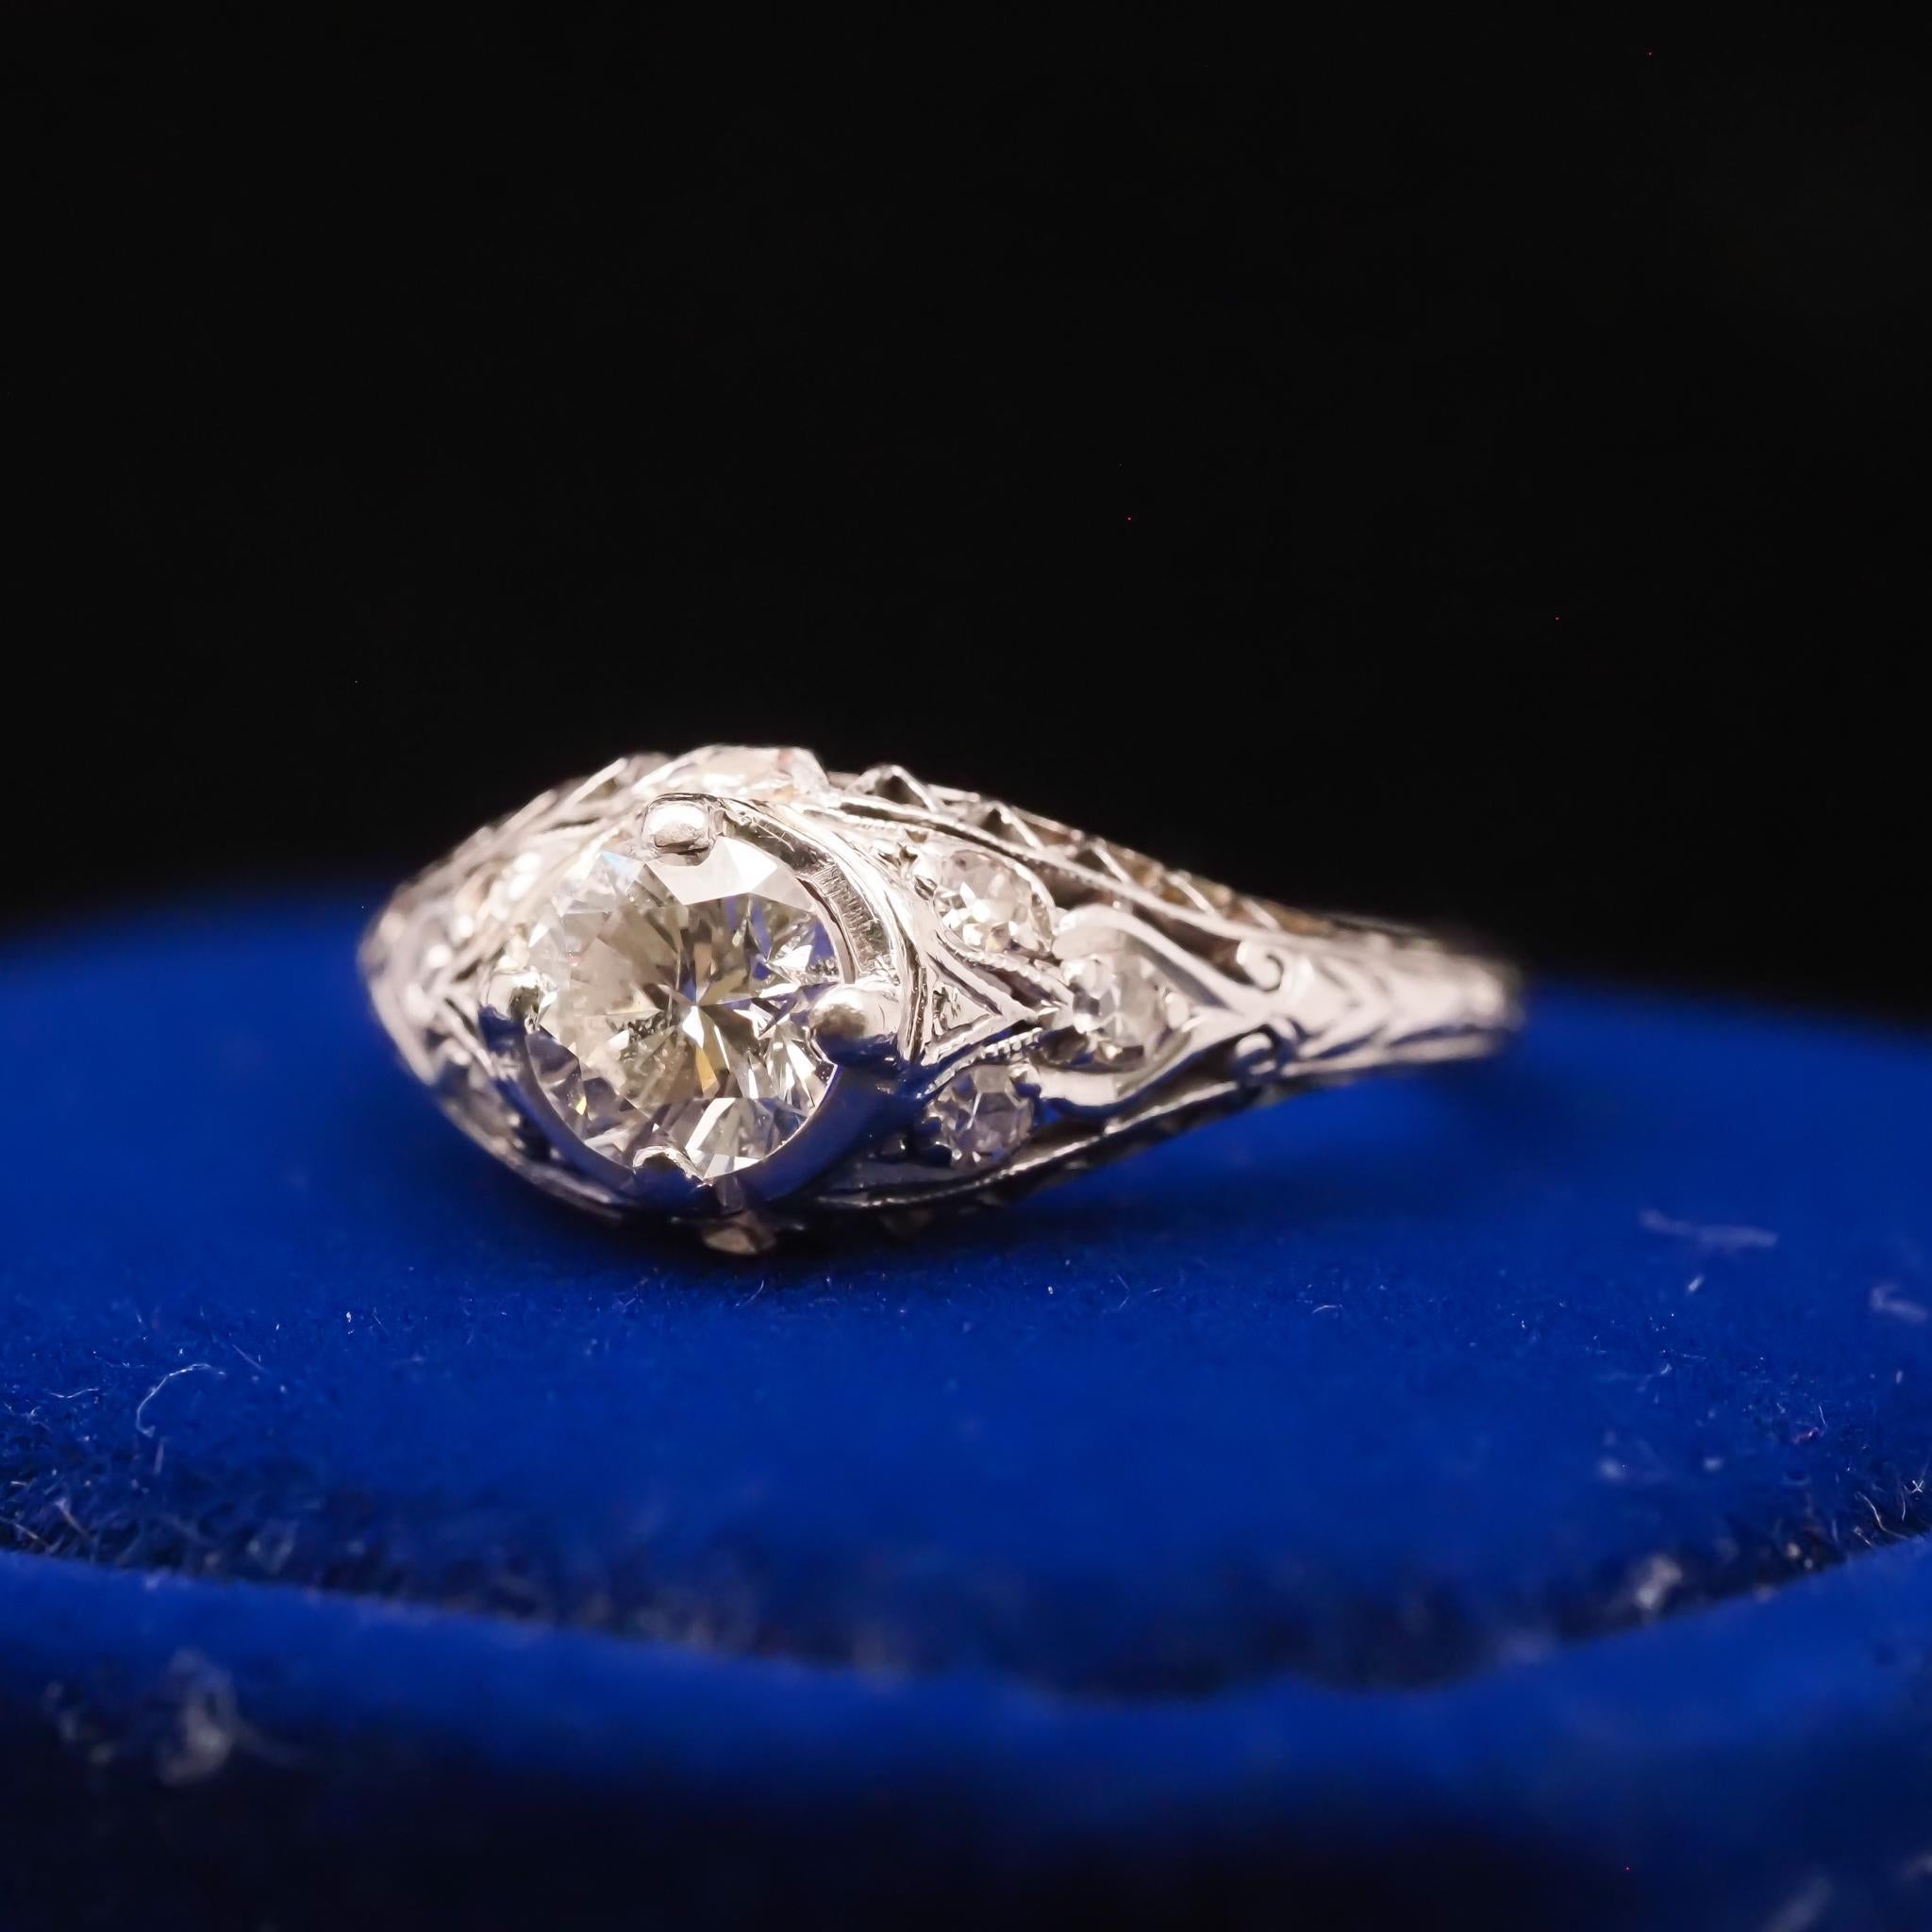 Year: 1940s
Item Details:
Ring Size: 5.75 (Sizable)
Metal Type: Platinum [Hallmarked, and Tested]
Weight: 3.9 grams
Diamond Details: .60ct, Transitional Round, G color, SI1 Clarity
Side Stone Details: .10ct total weight, G Color, VS Clarity,